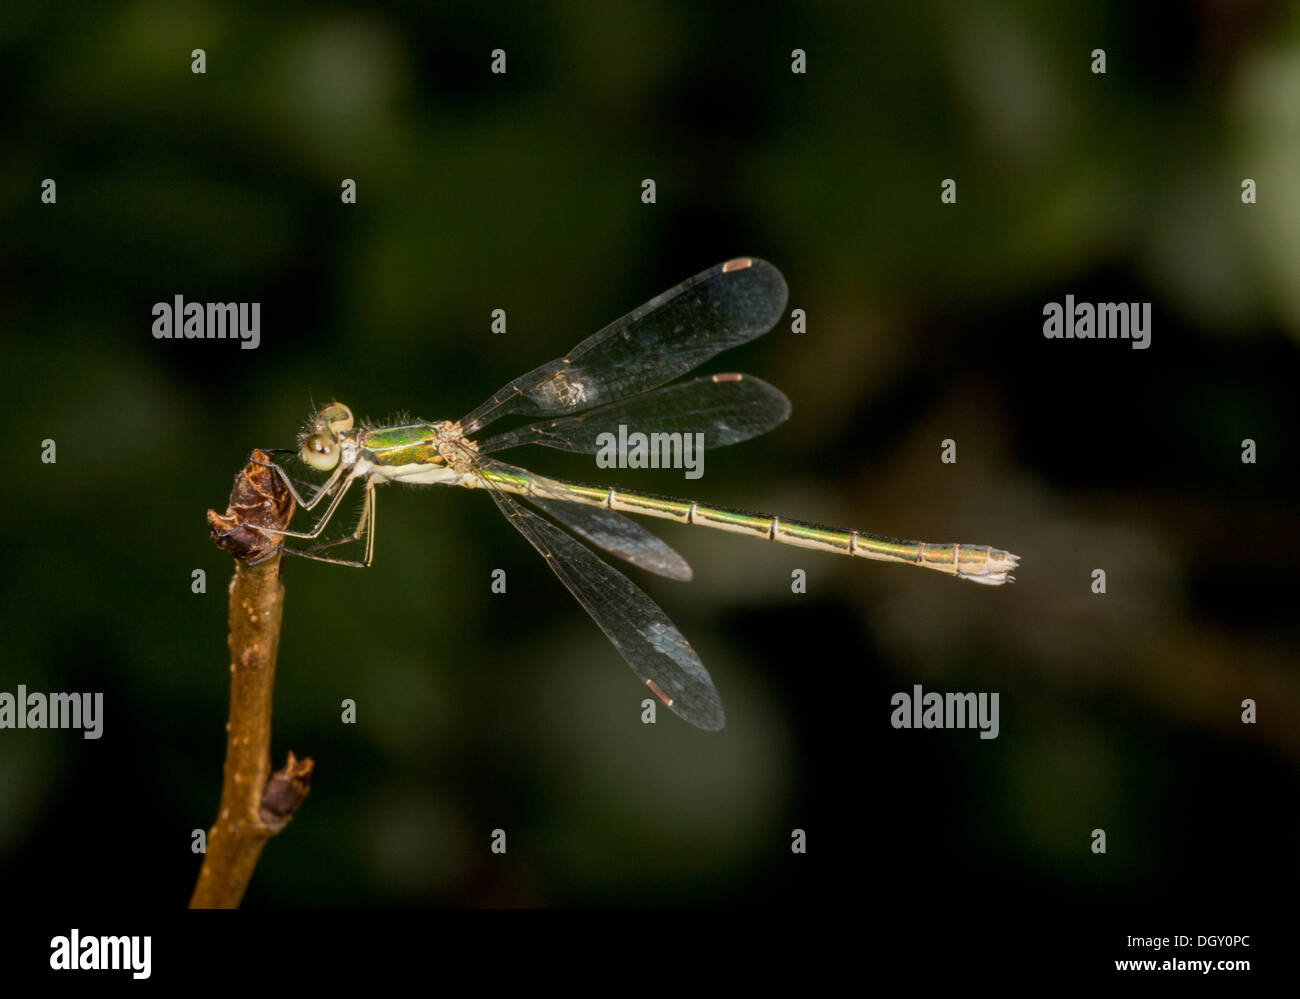 Female Small Spreadwing / Small Emerald Damselfly, Lestes virens, perched Stock Photo